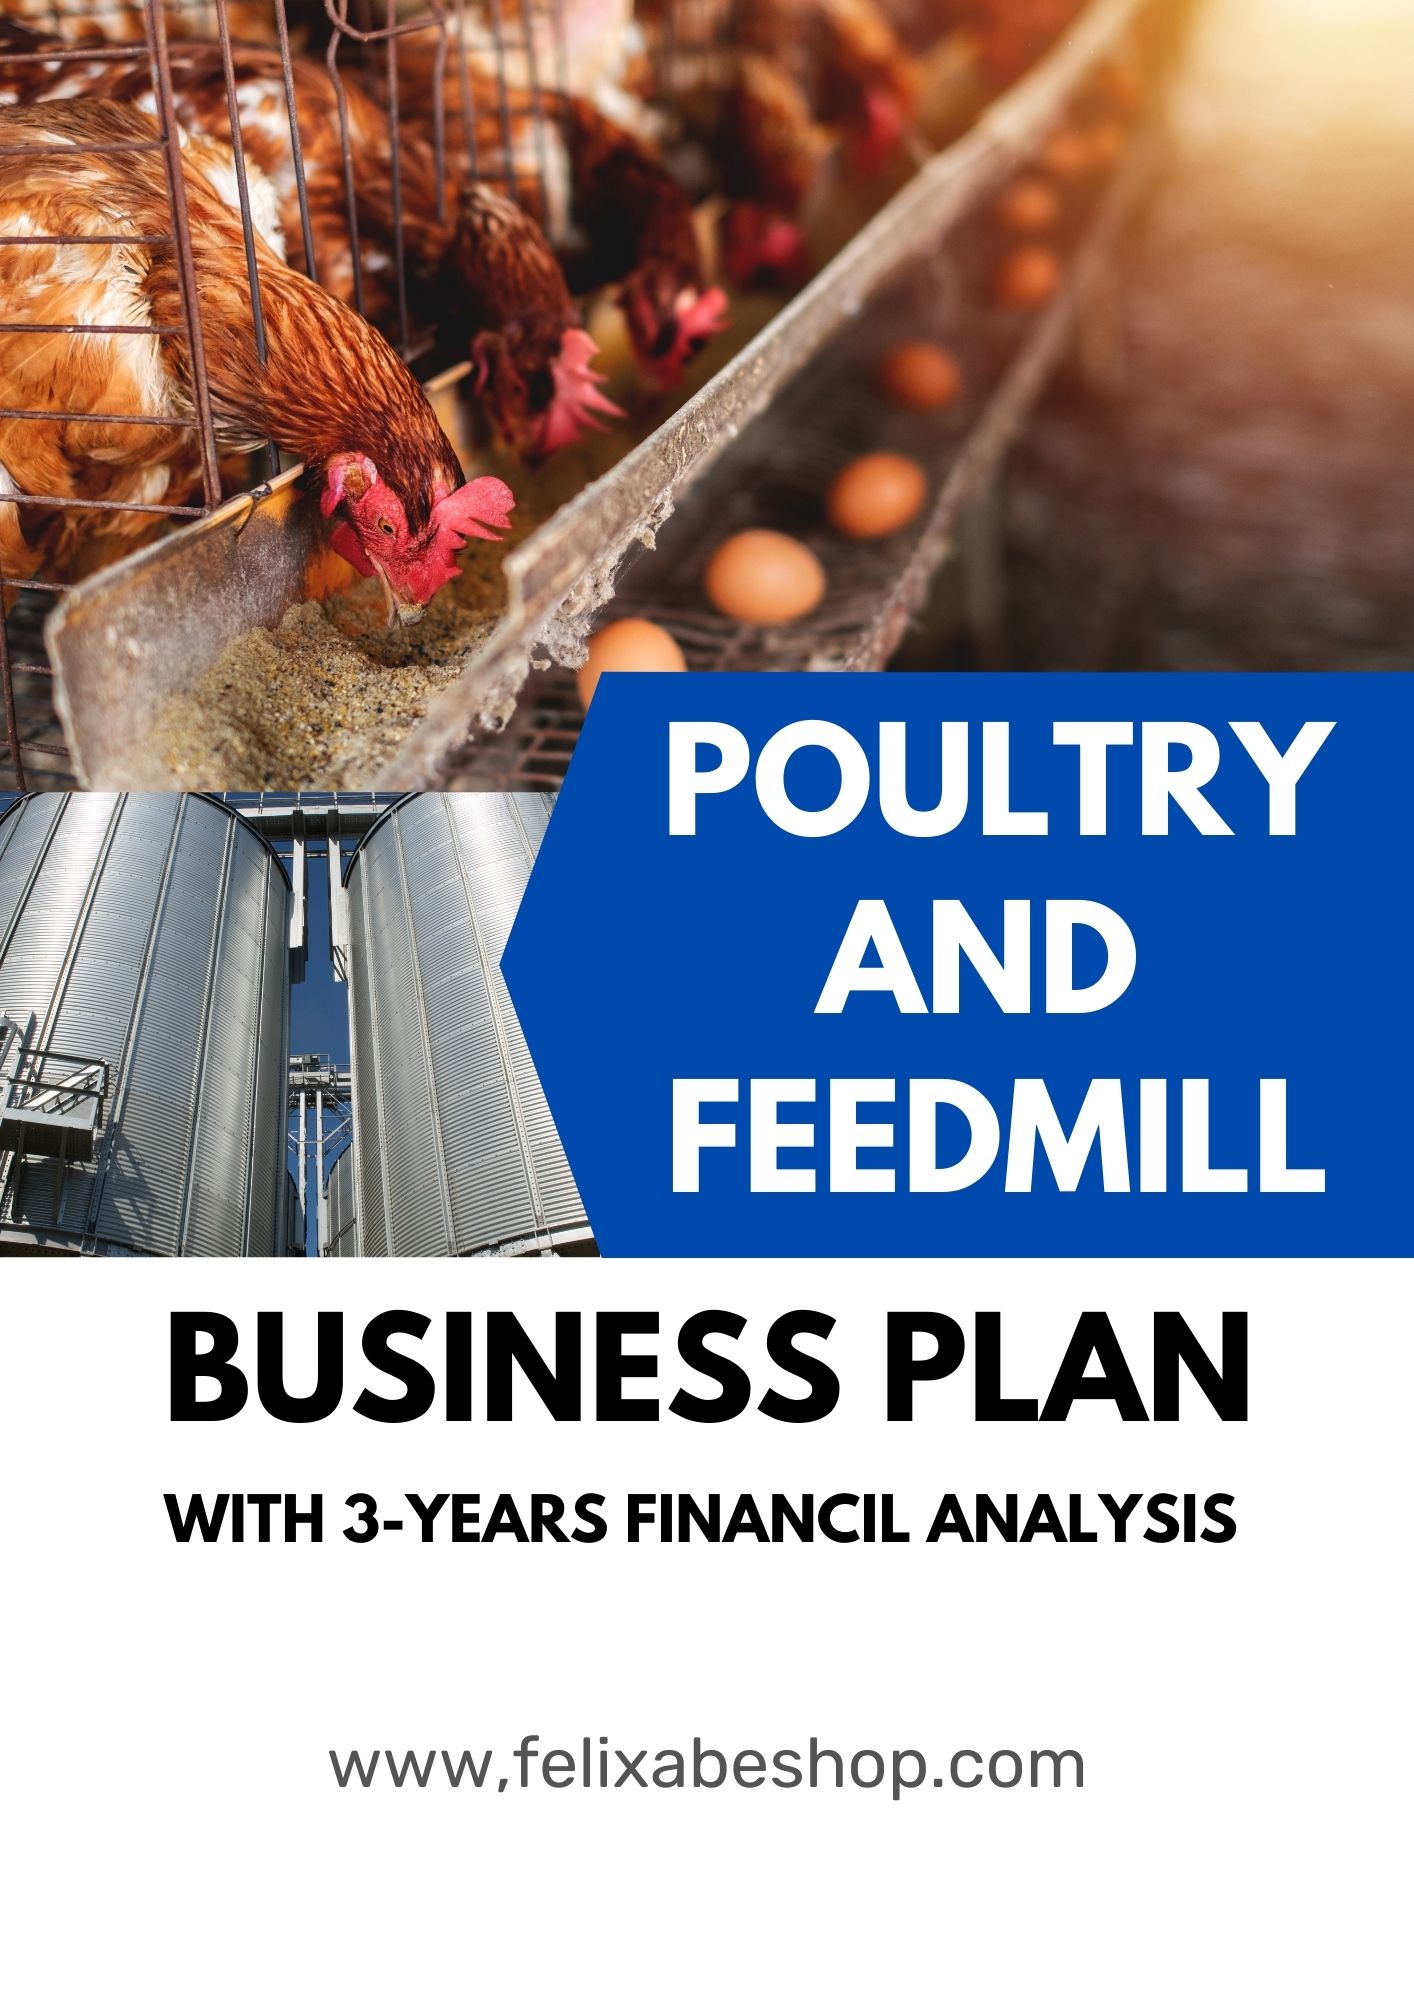 business plan of poultry feed